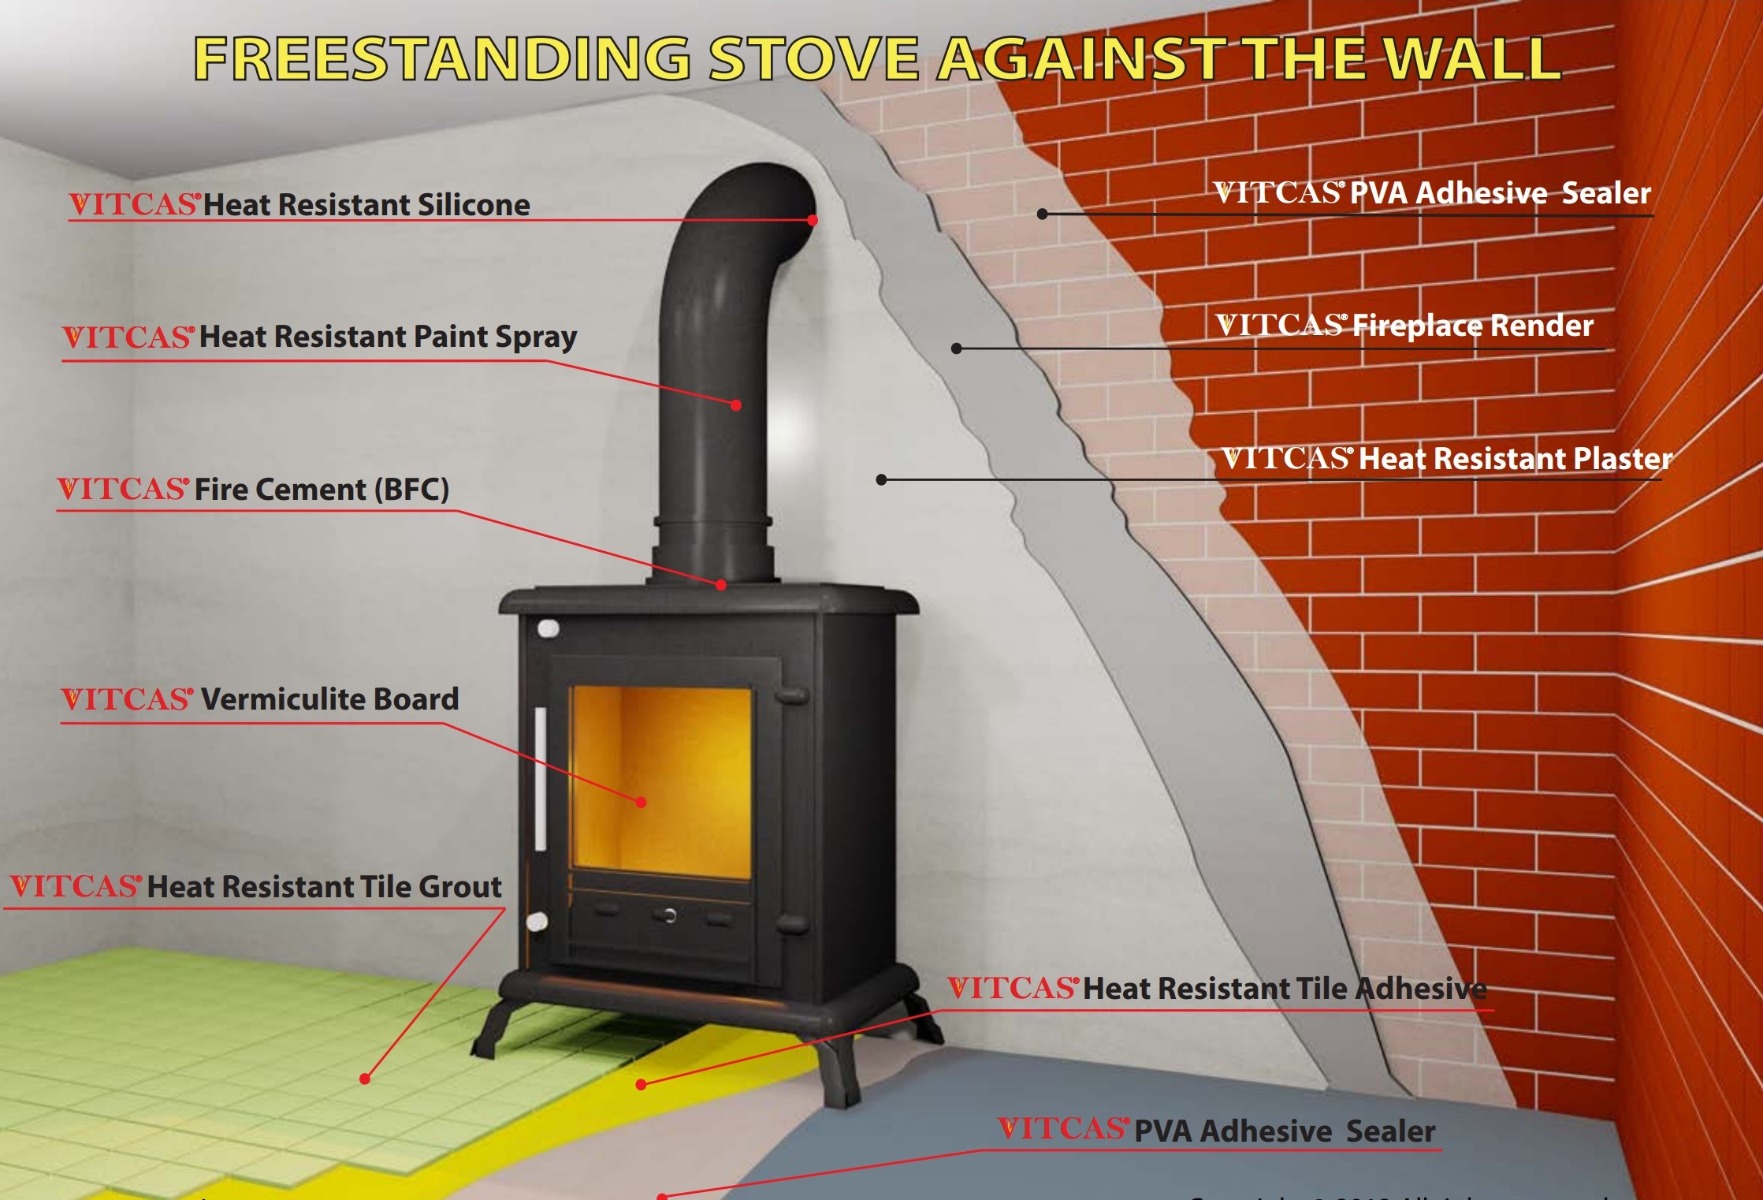 freestanding-stove-against-the-wall